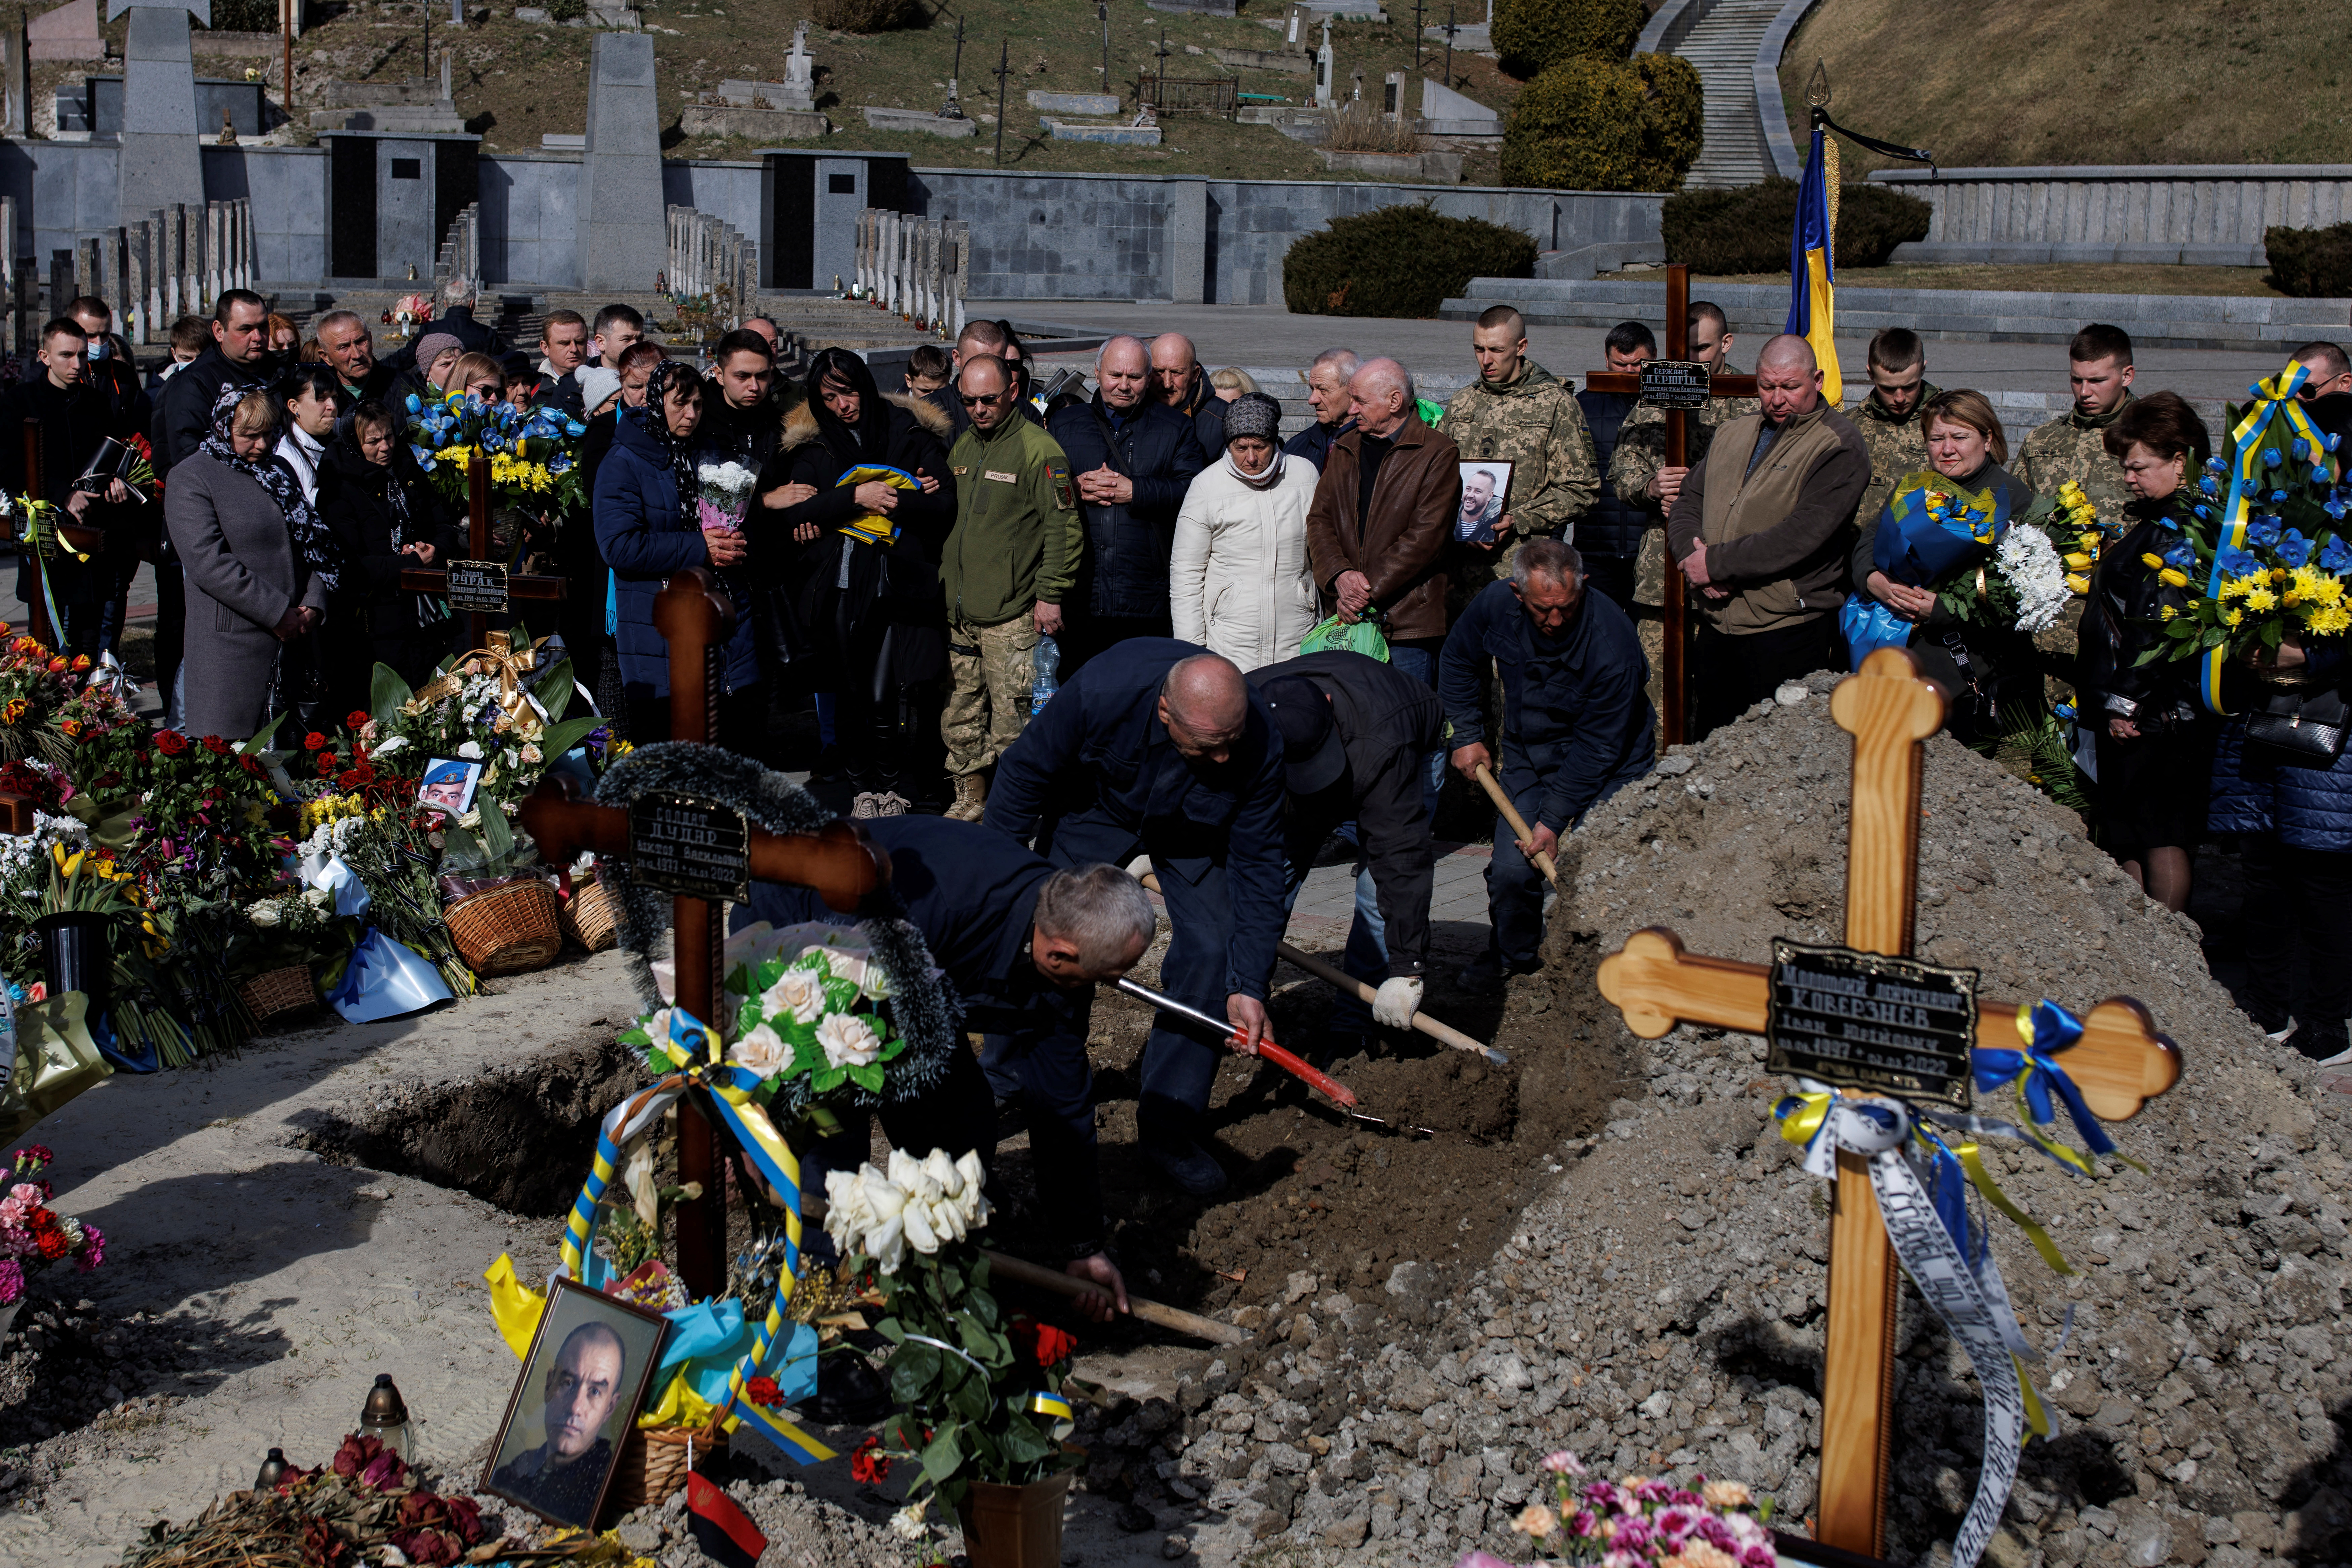 Cemetery workers cover the grave of sergeant Kostiantyn Deriuhin, who was killed in battle during Russia’s attack on Ukraine, during his funeral at the Lychakiv cemetery in Lviv